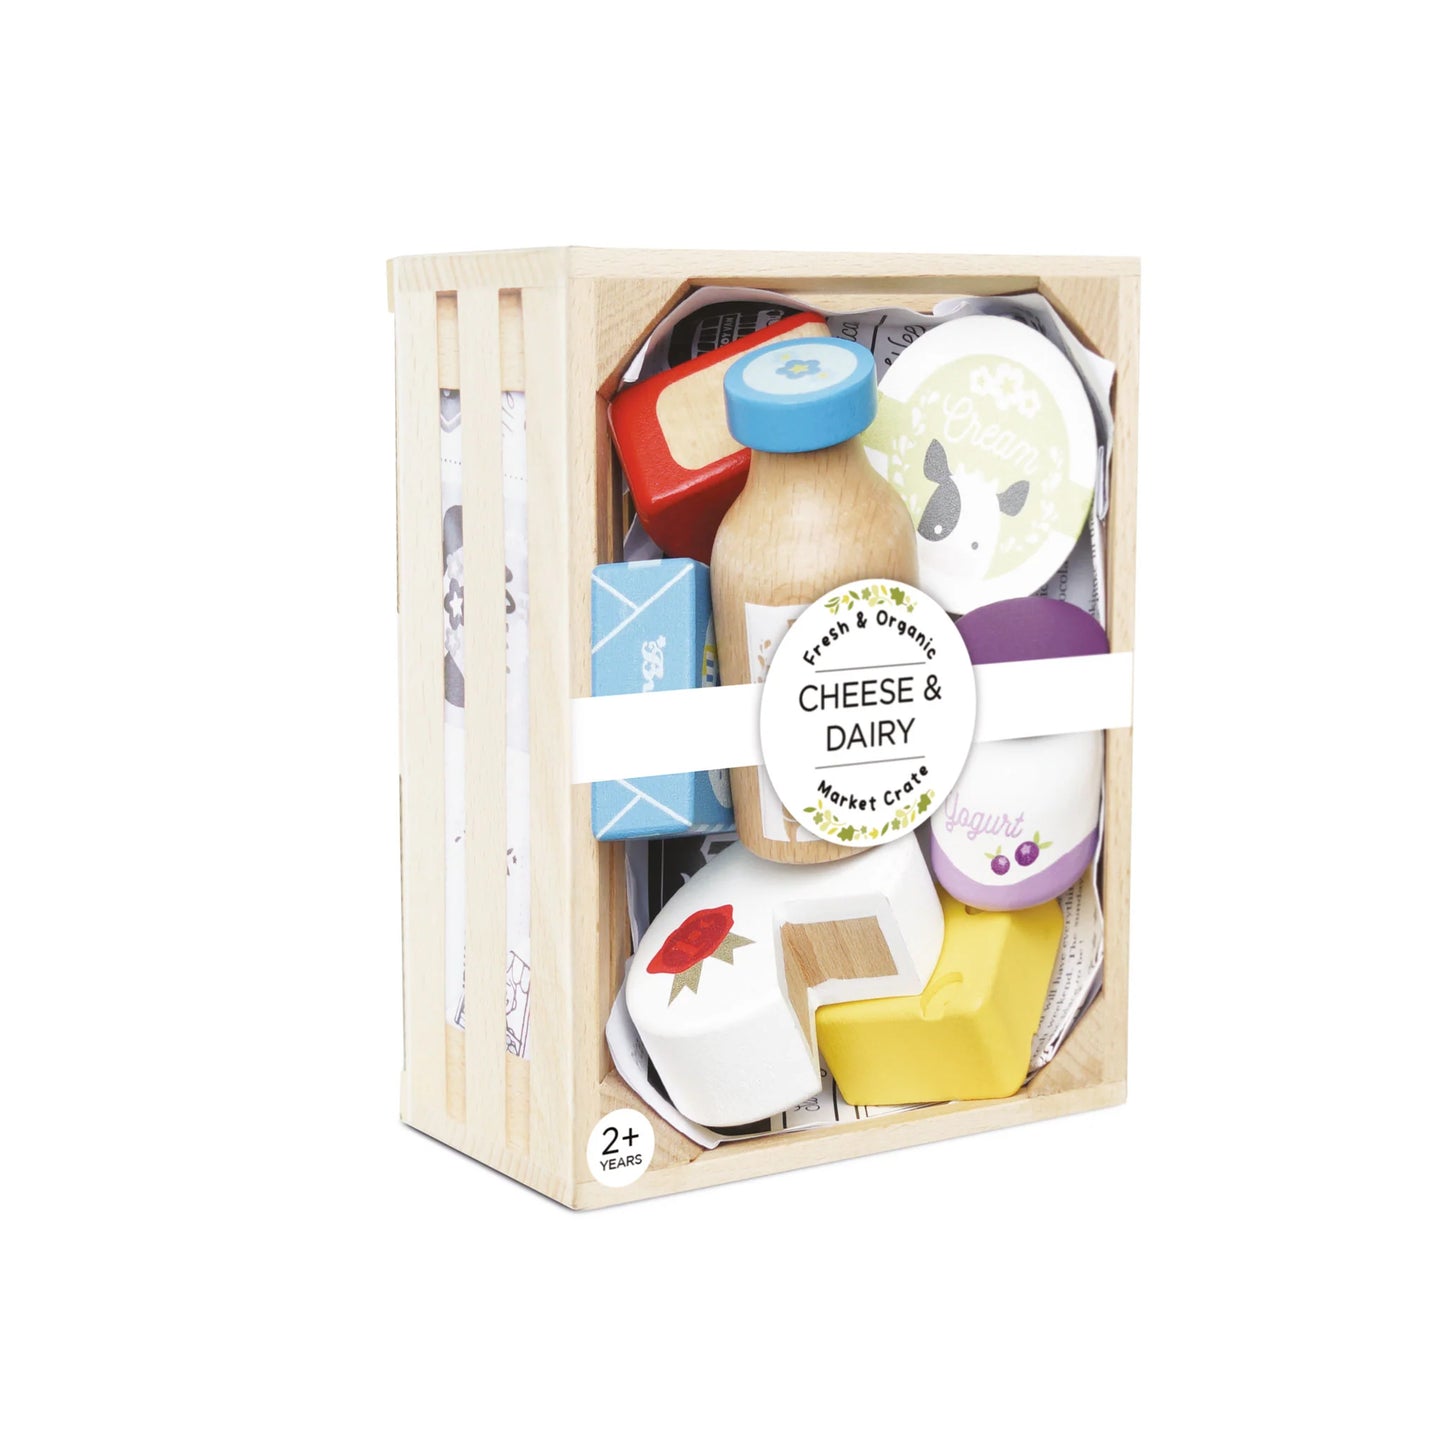 Cheese & Dairy Wooden Market Crate - Wooden Toy Food by Le Toy Van